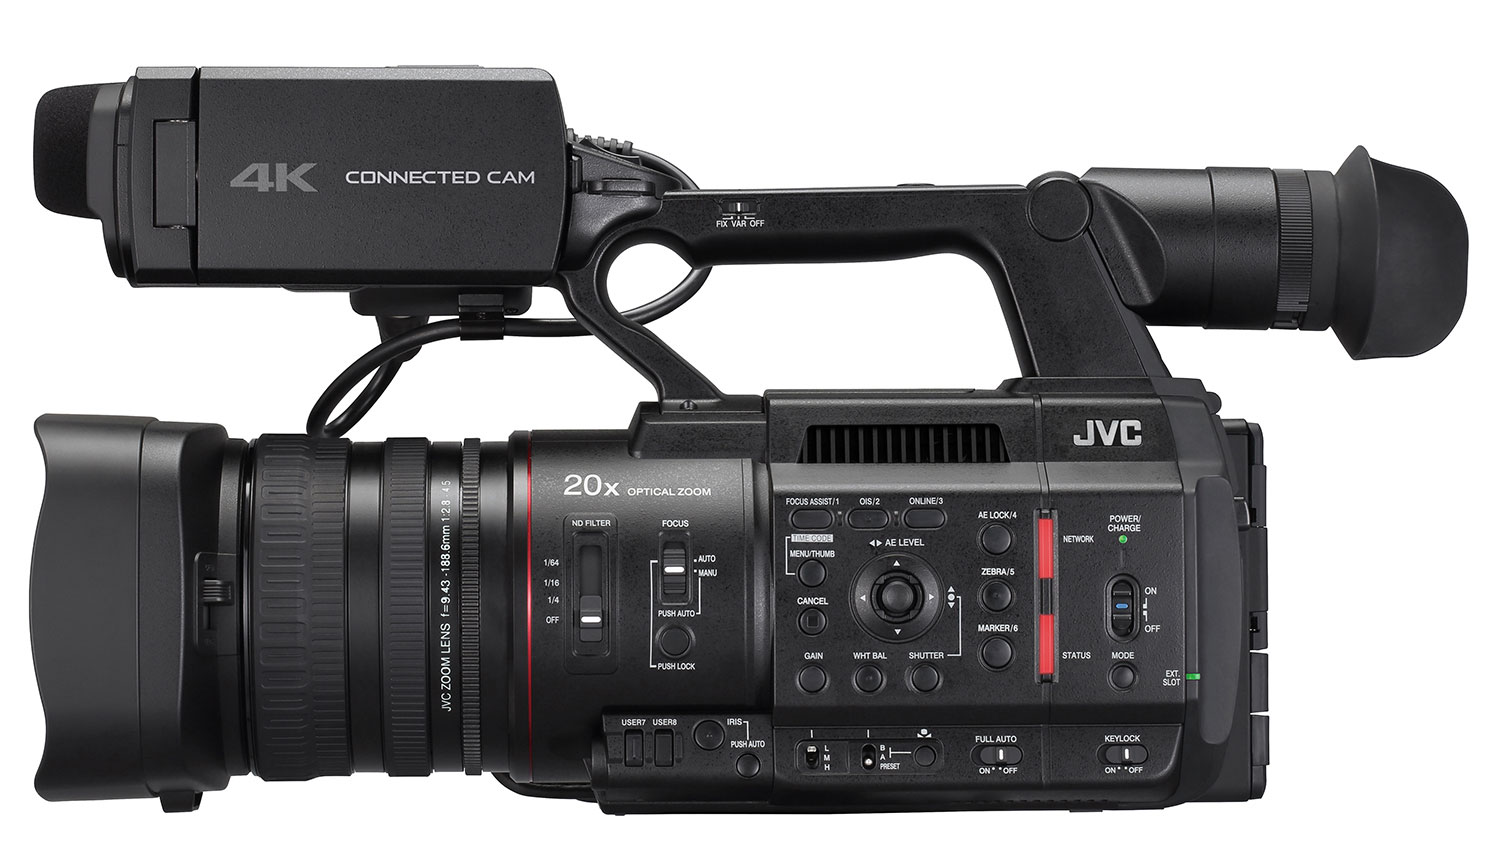 How to set up streaming from JVC GY-HC500U camera using SRT protocol and  Callaba Cloud